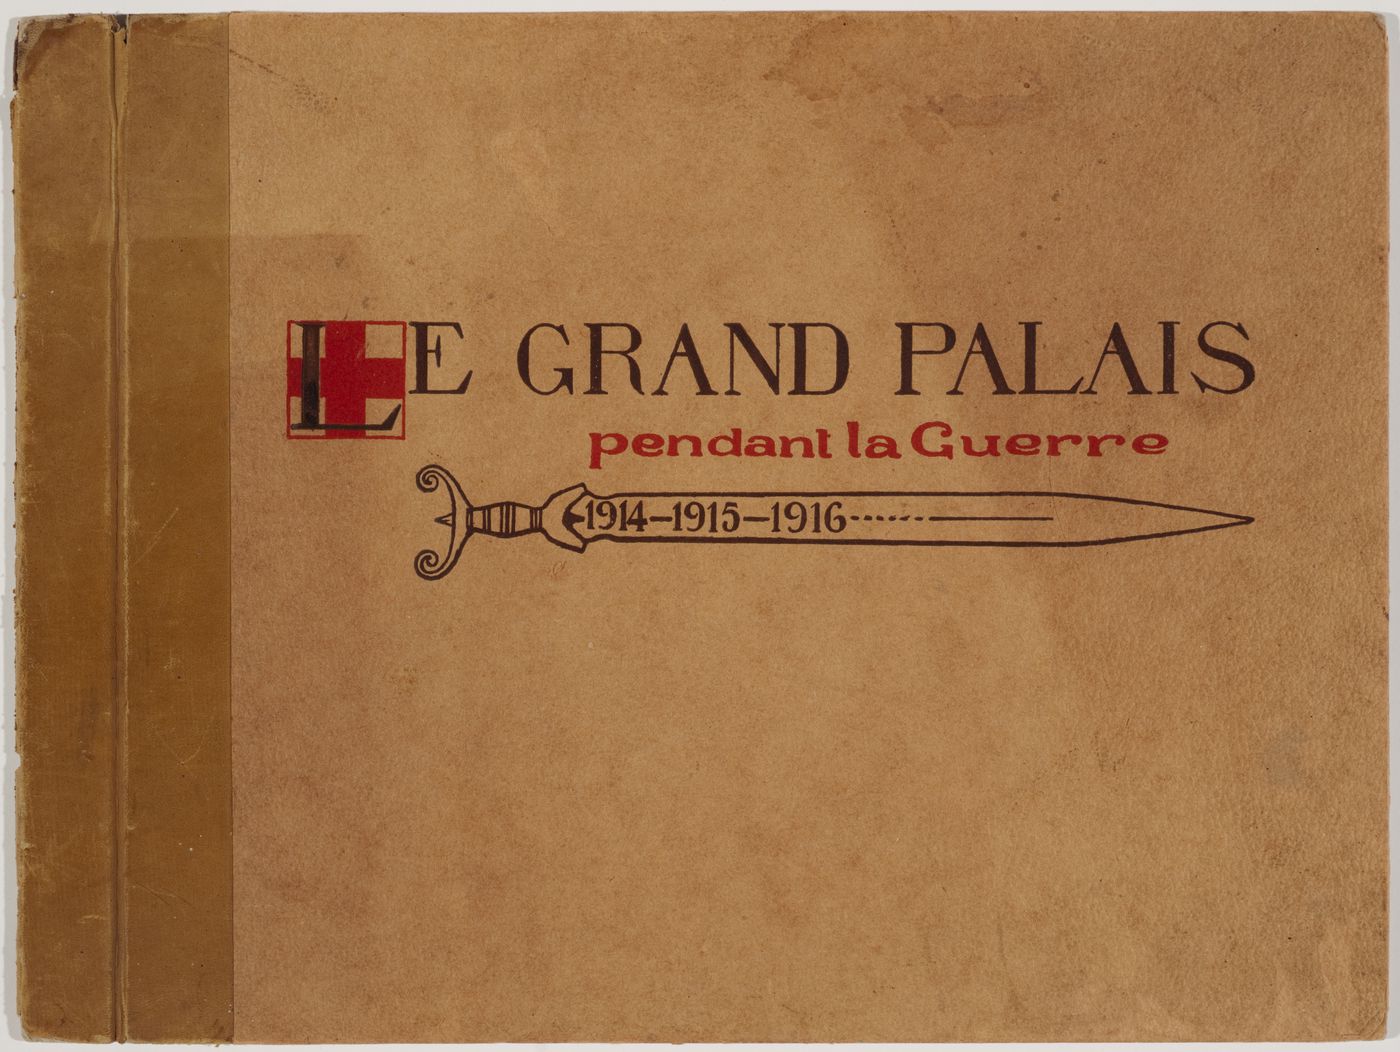 Album of interior and exterior views of the military hospital housed in the Grand Palais during World War I, Paris, France